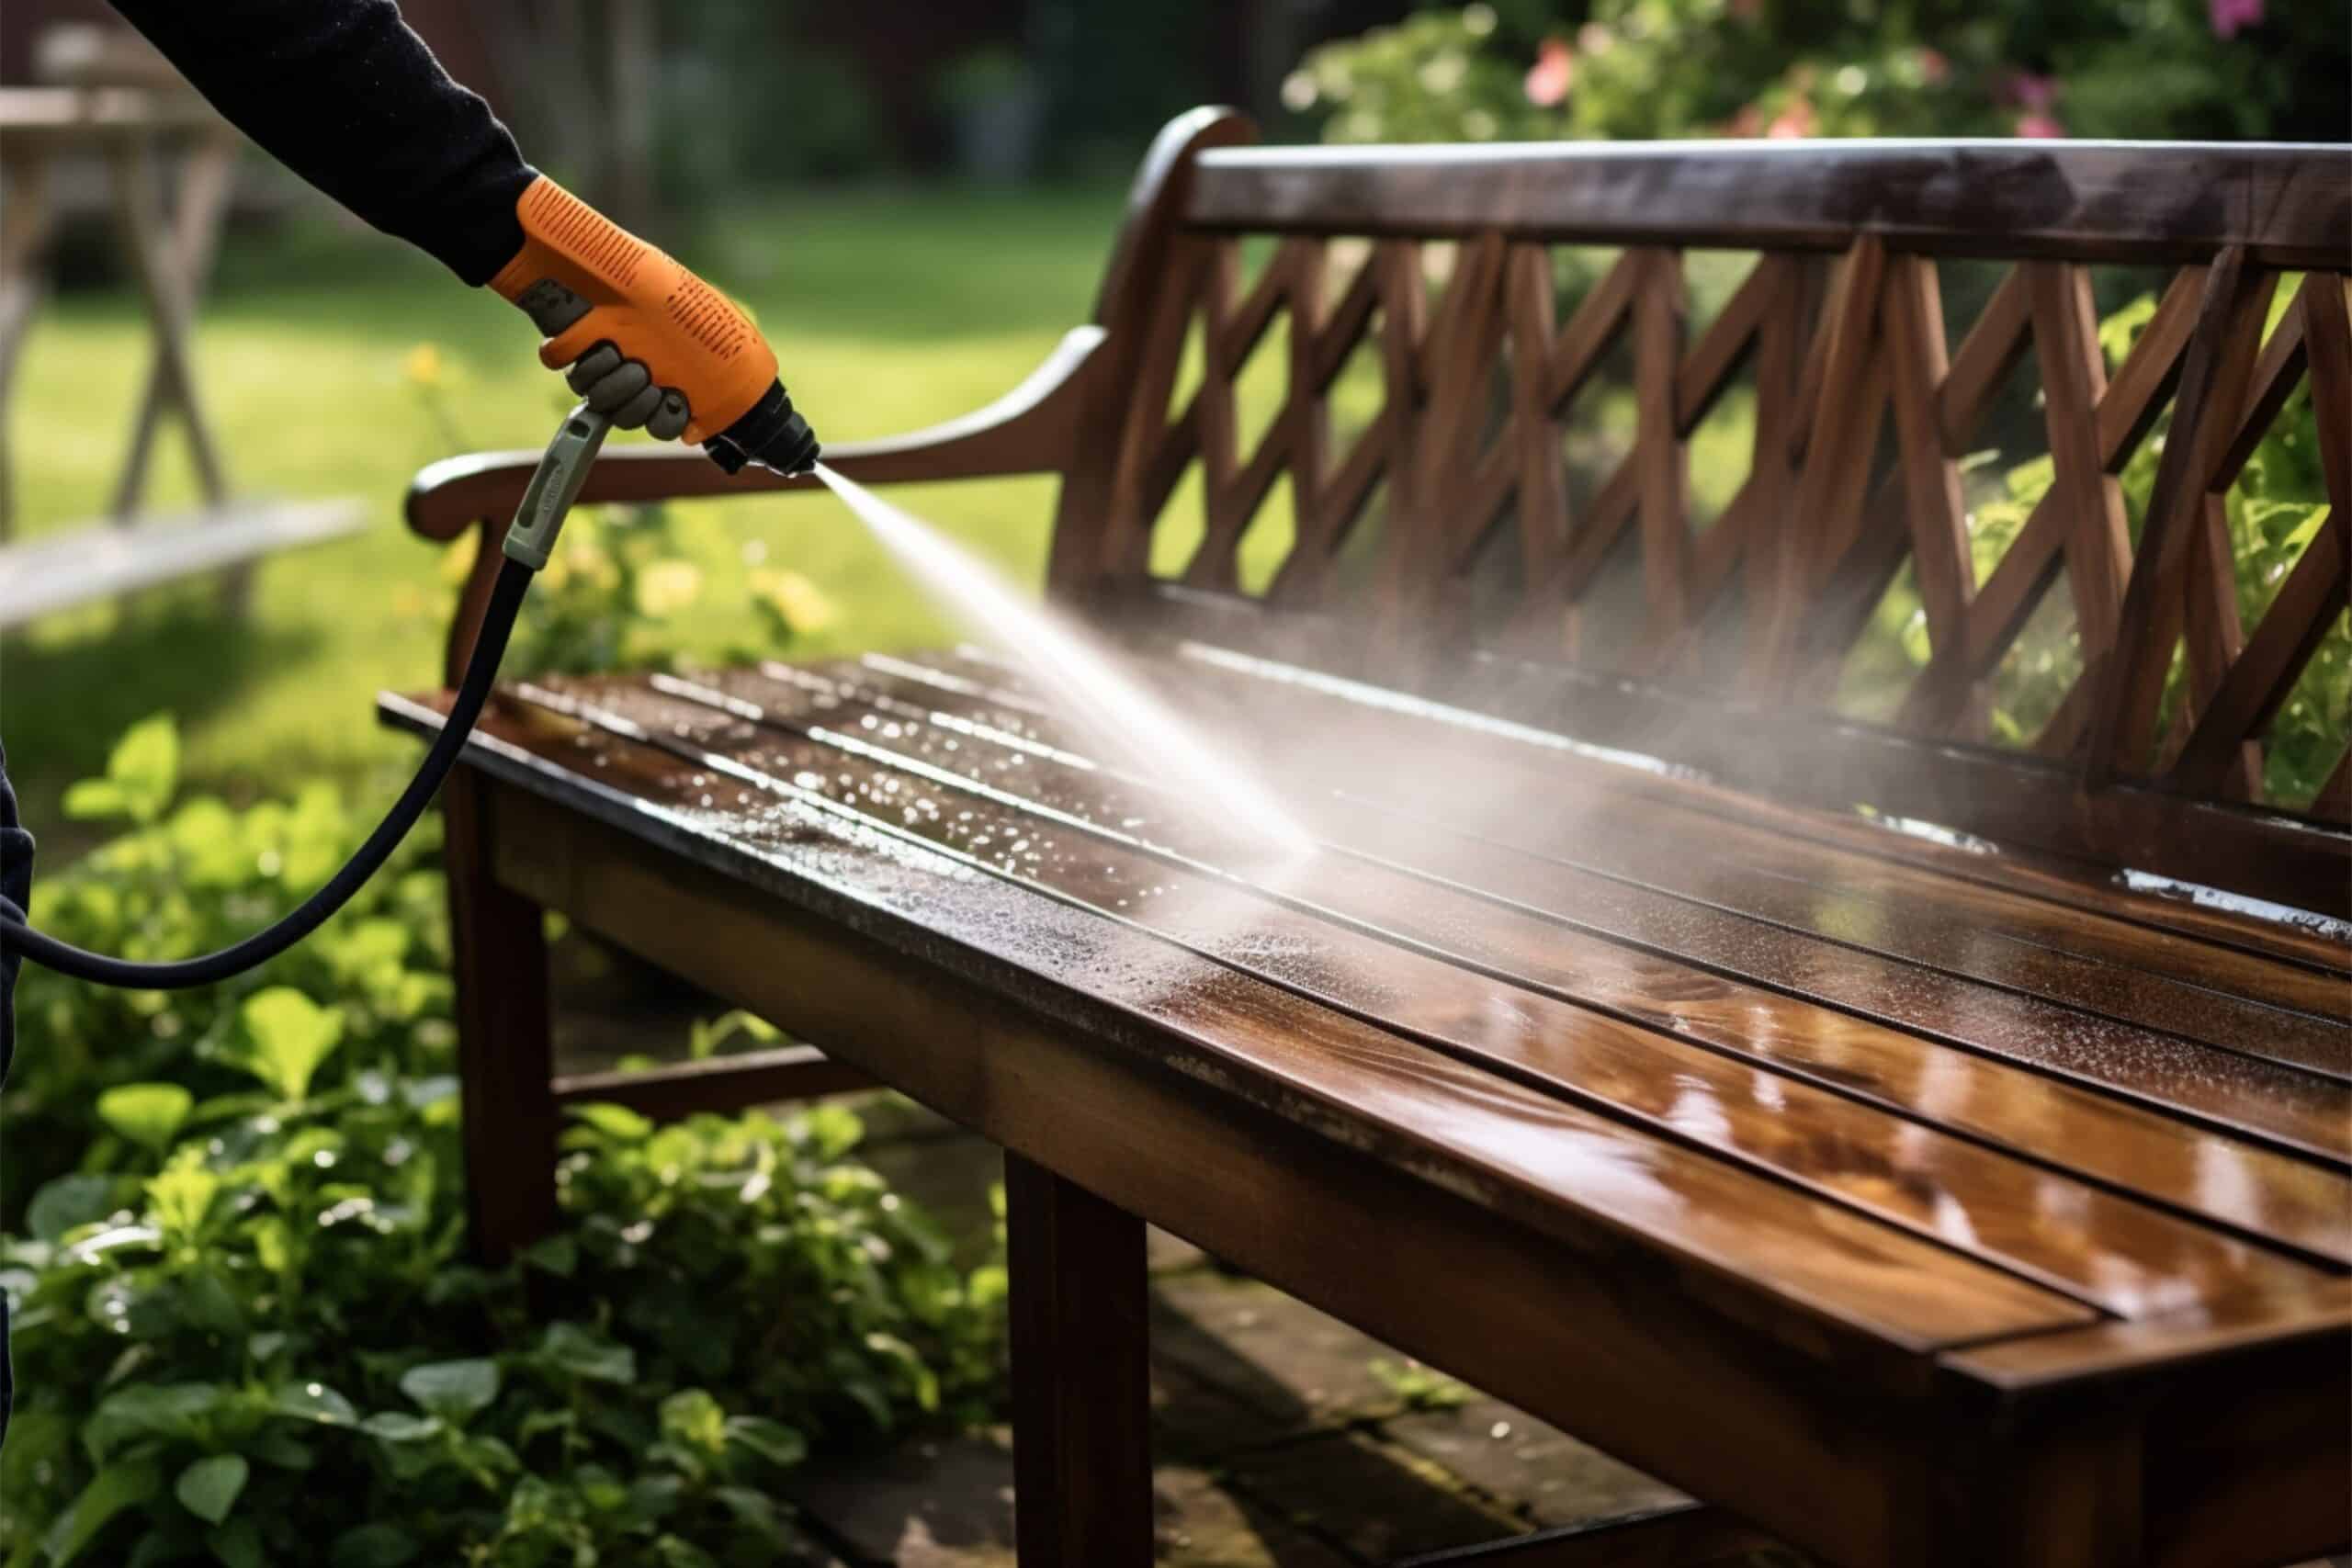 www.appr.com : Are electric pressure washers environmentally friendly?